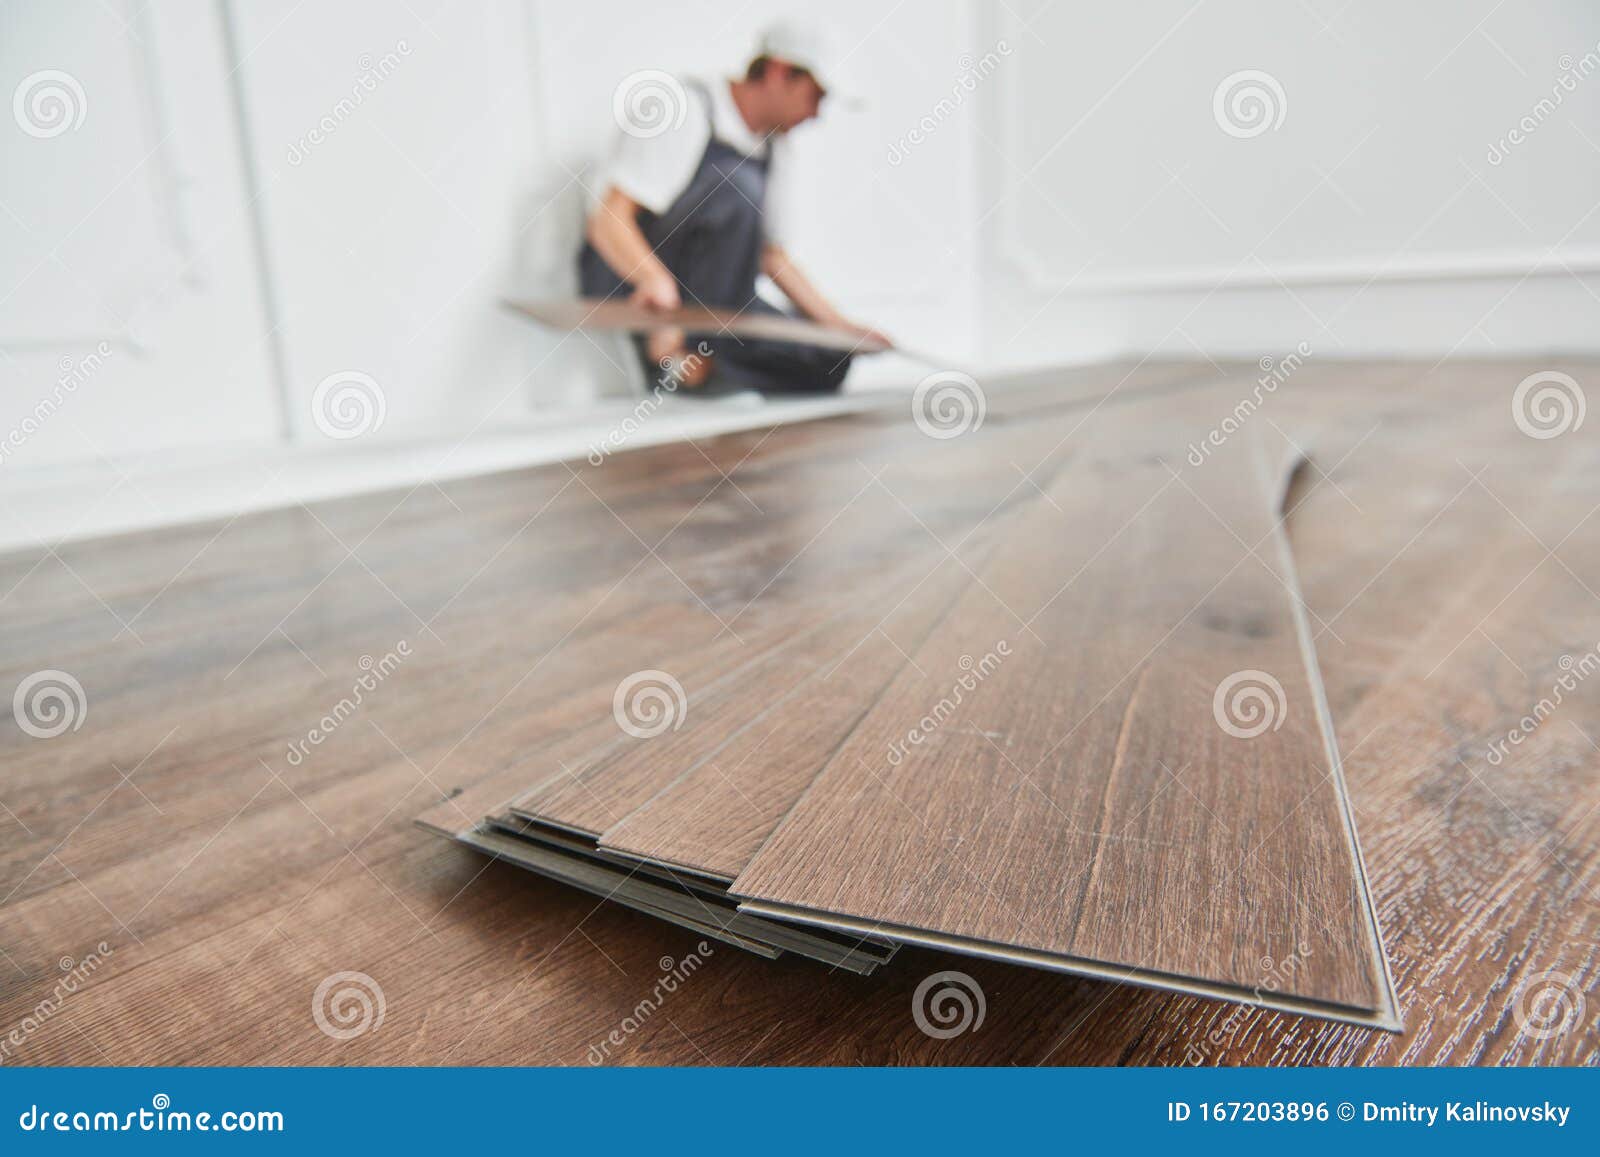 Worker Laying Vinyl Floor Covering At Home Renovation Stock Photo